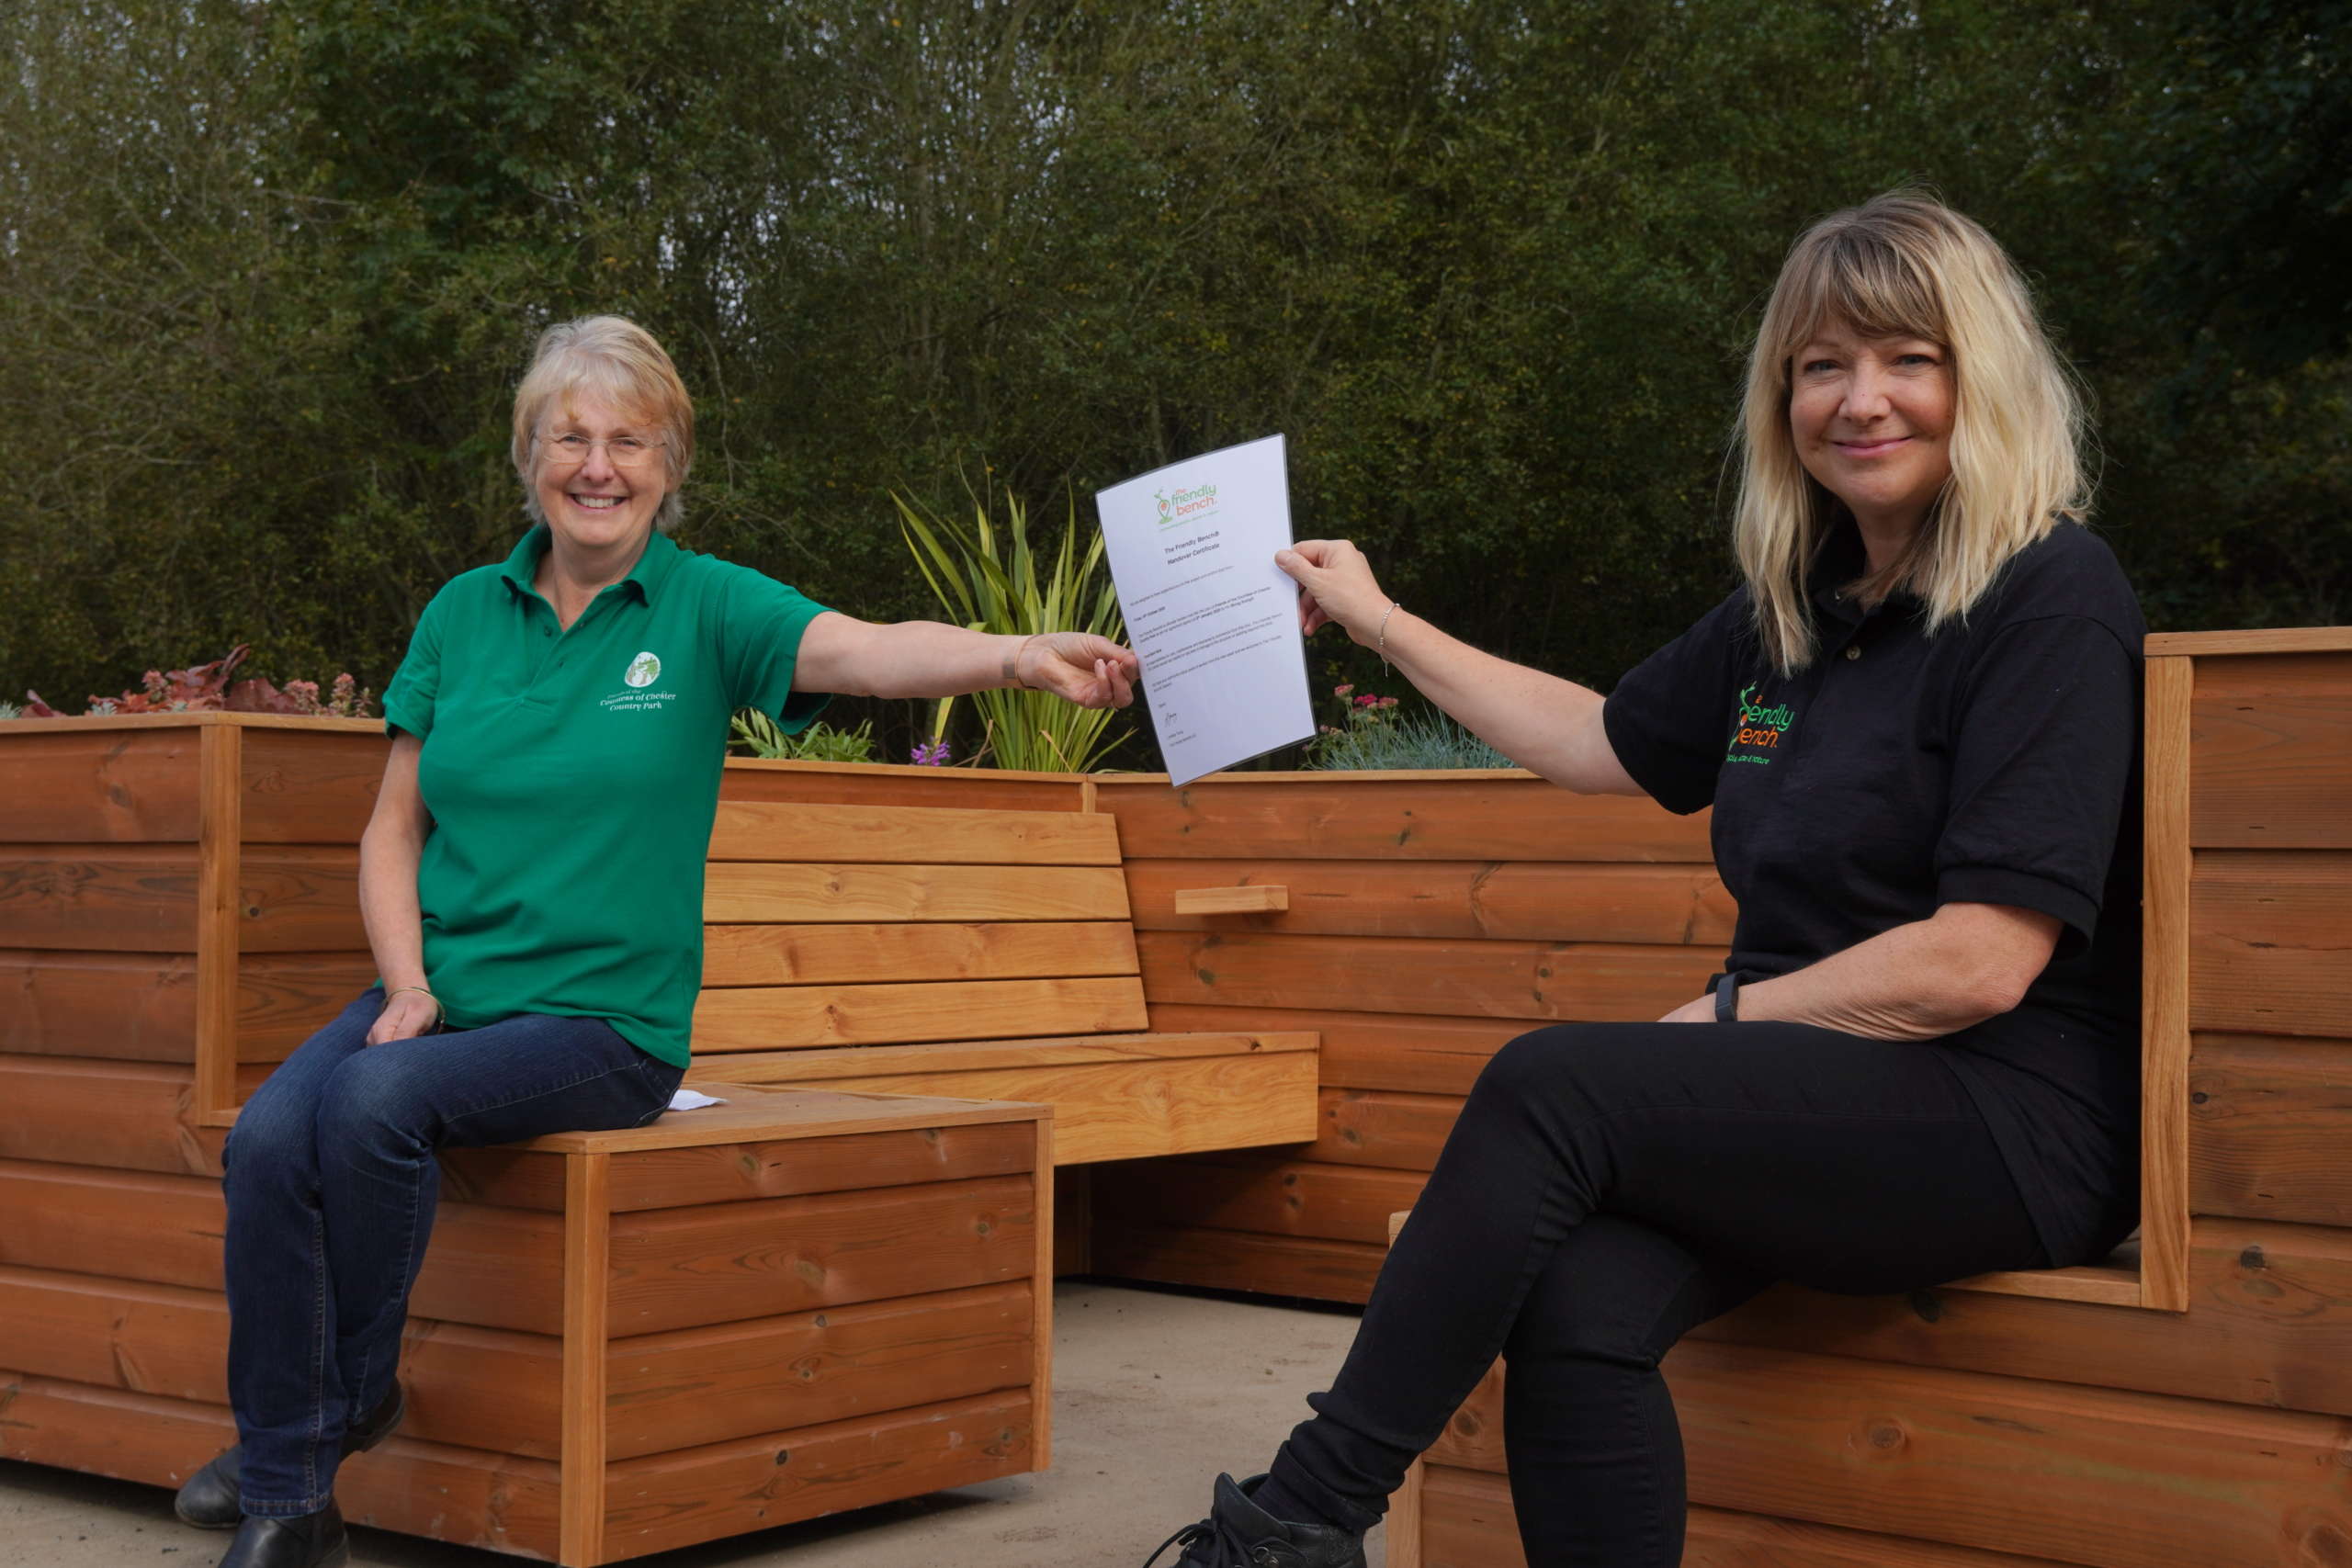 Morag and Lyndsey, the creator of The Friendly Bench